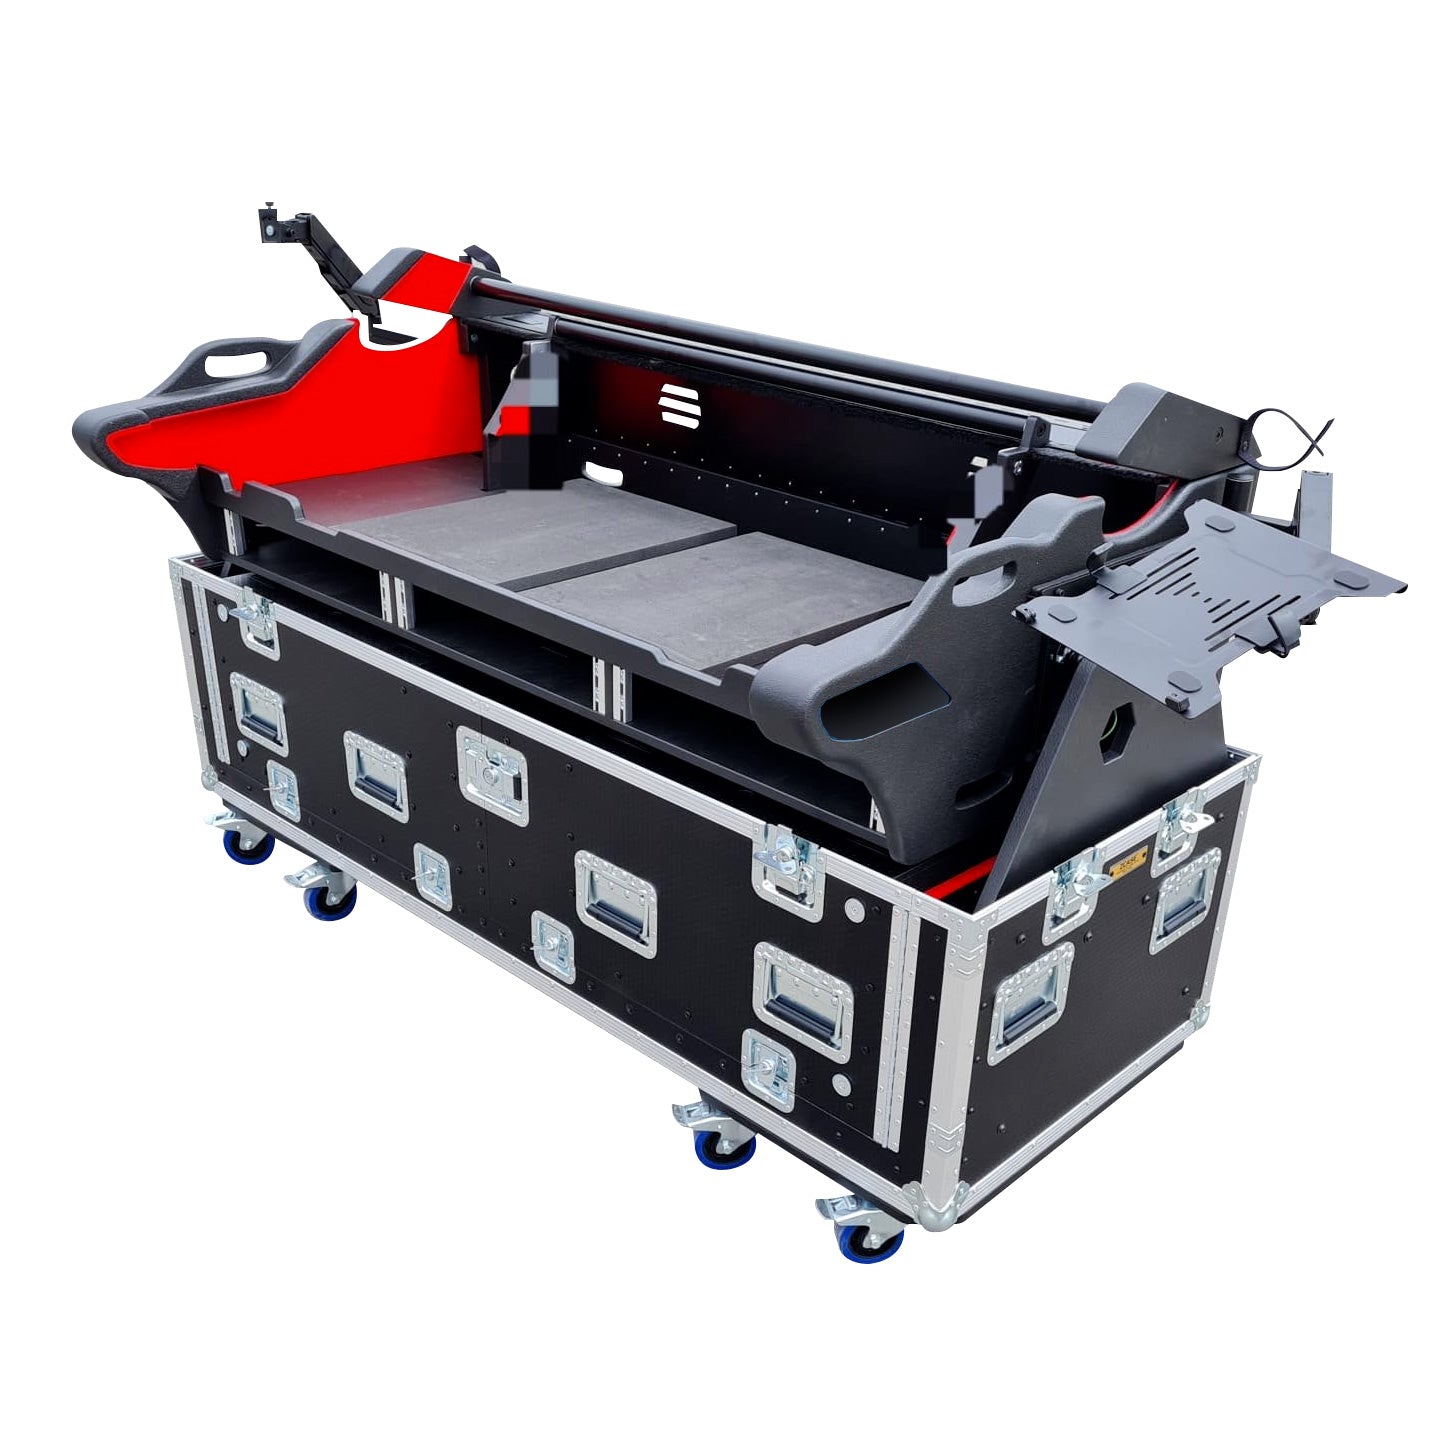 Pro X For DiGiCo Quantum 338 Flip-Ready Hydraulic Console Easy Retracting Lifting Rack Space Flight Case with wheels by ZCASE XZF-DIGQ3382X2U